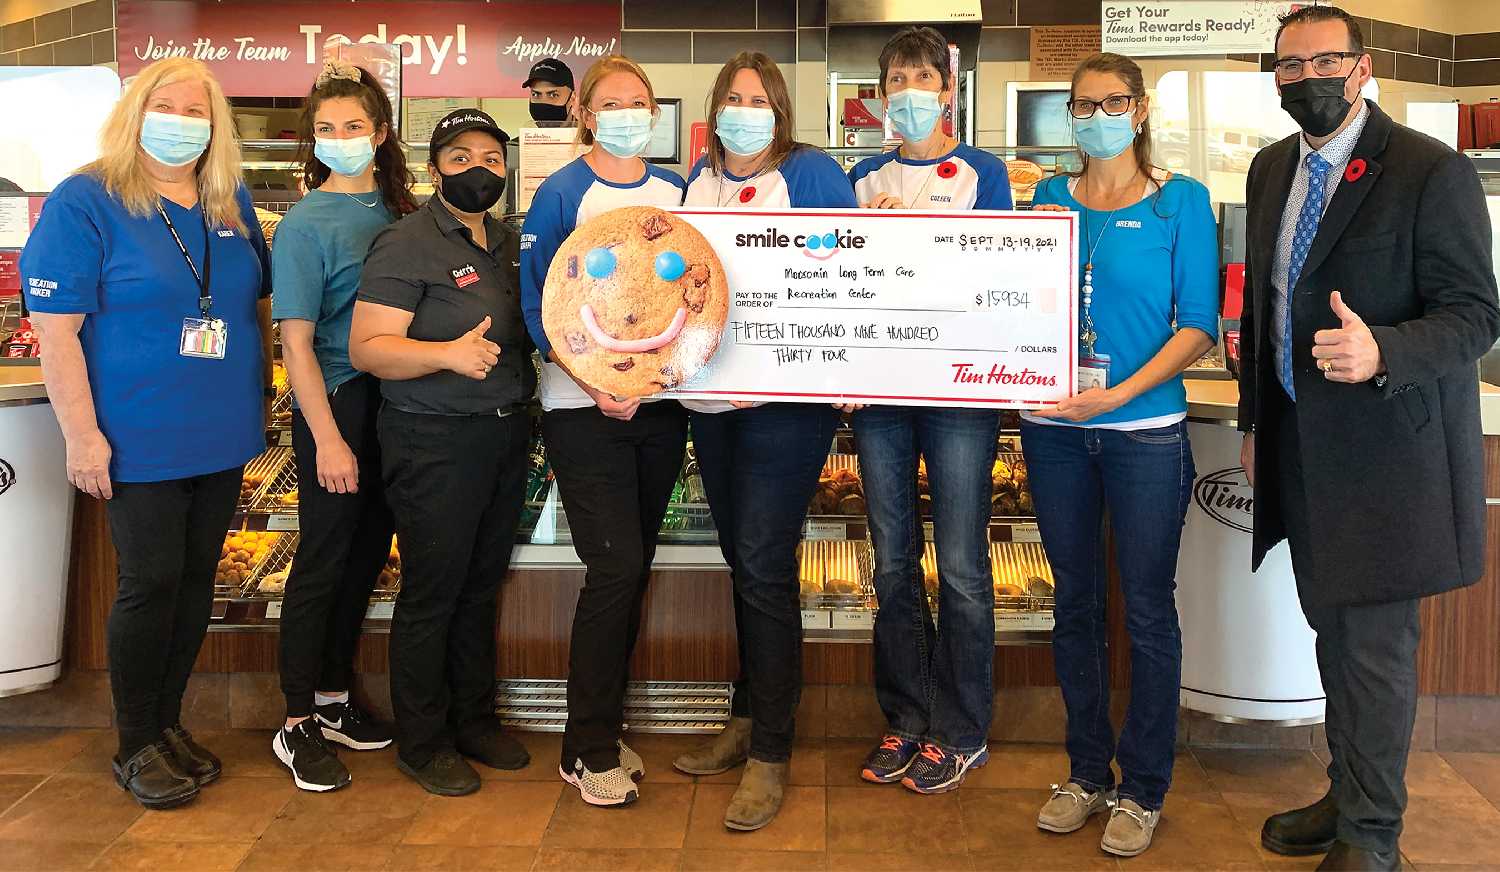 Tim Hortons Moosomin presented a cheque for $15,934 to Moosomin Long-Term care last week. The cheque represents the proceeds of the 2021 Smile Cookie campaign in Moosomin. It is a record amount raised in Moosomin, and in the top three in Saskatchewan for funds raised this year. At right is Greg Crisanti (Westman Tim Hortons manager). From left are Karen Holloway (recreation worker), Jenna Grose (resident care coordinator), Cherrie Caliwag (Moosomin Tim Hortons manager), Amber Szafron-Campbell (recreation worker), Sara Gustafson (recreation coordinator), Coleen Webb (recreation worker) and Br